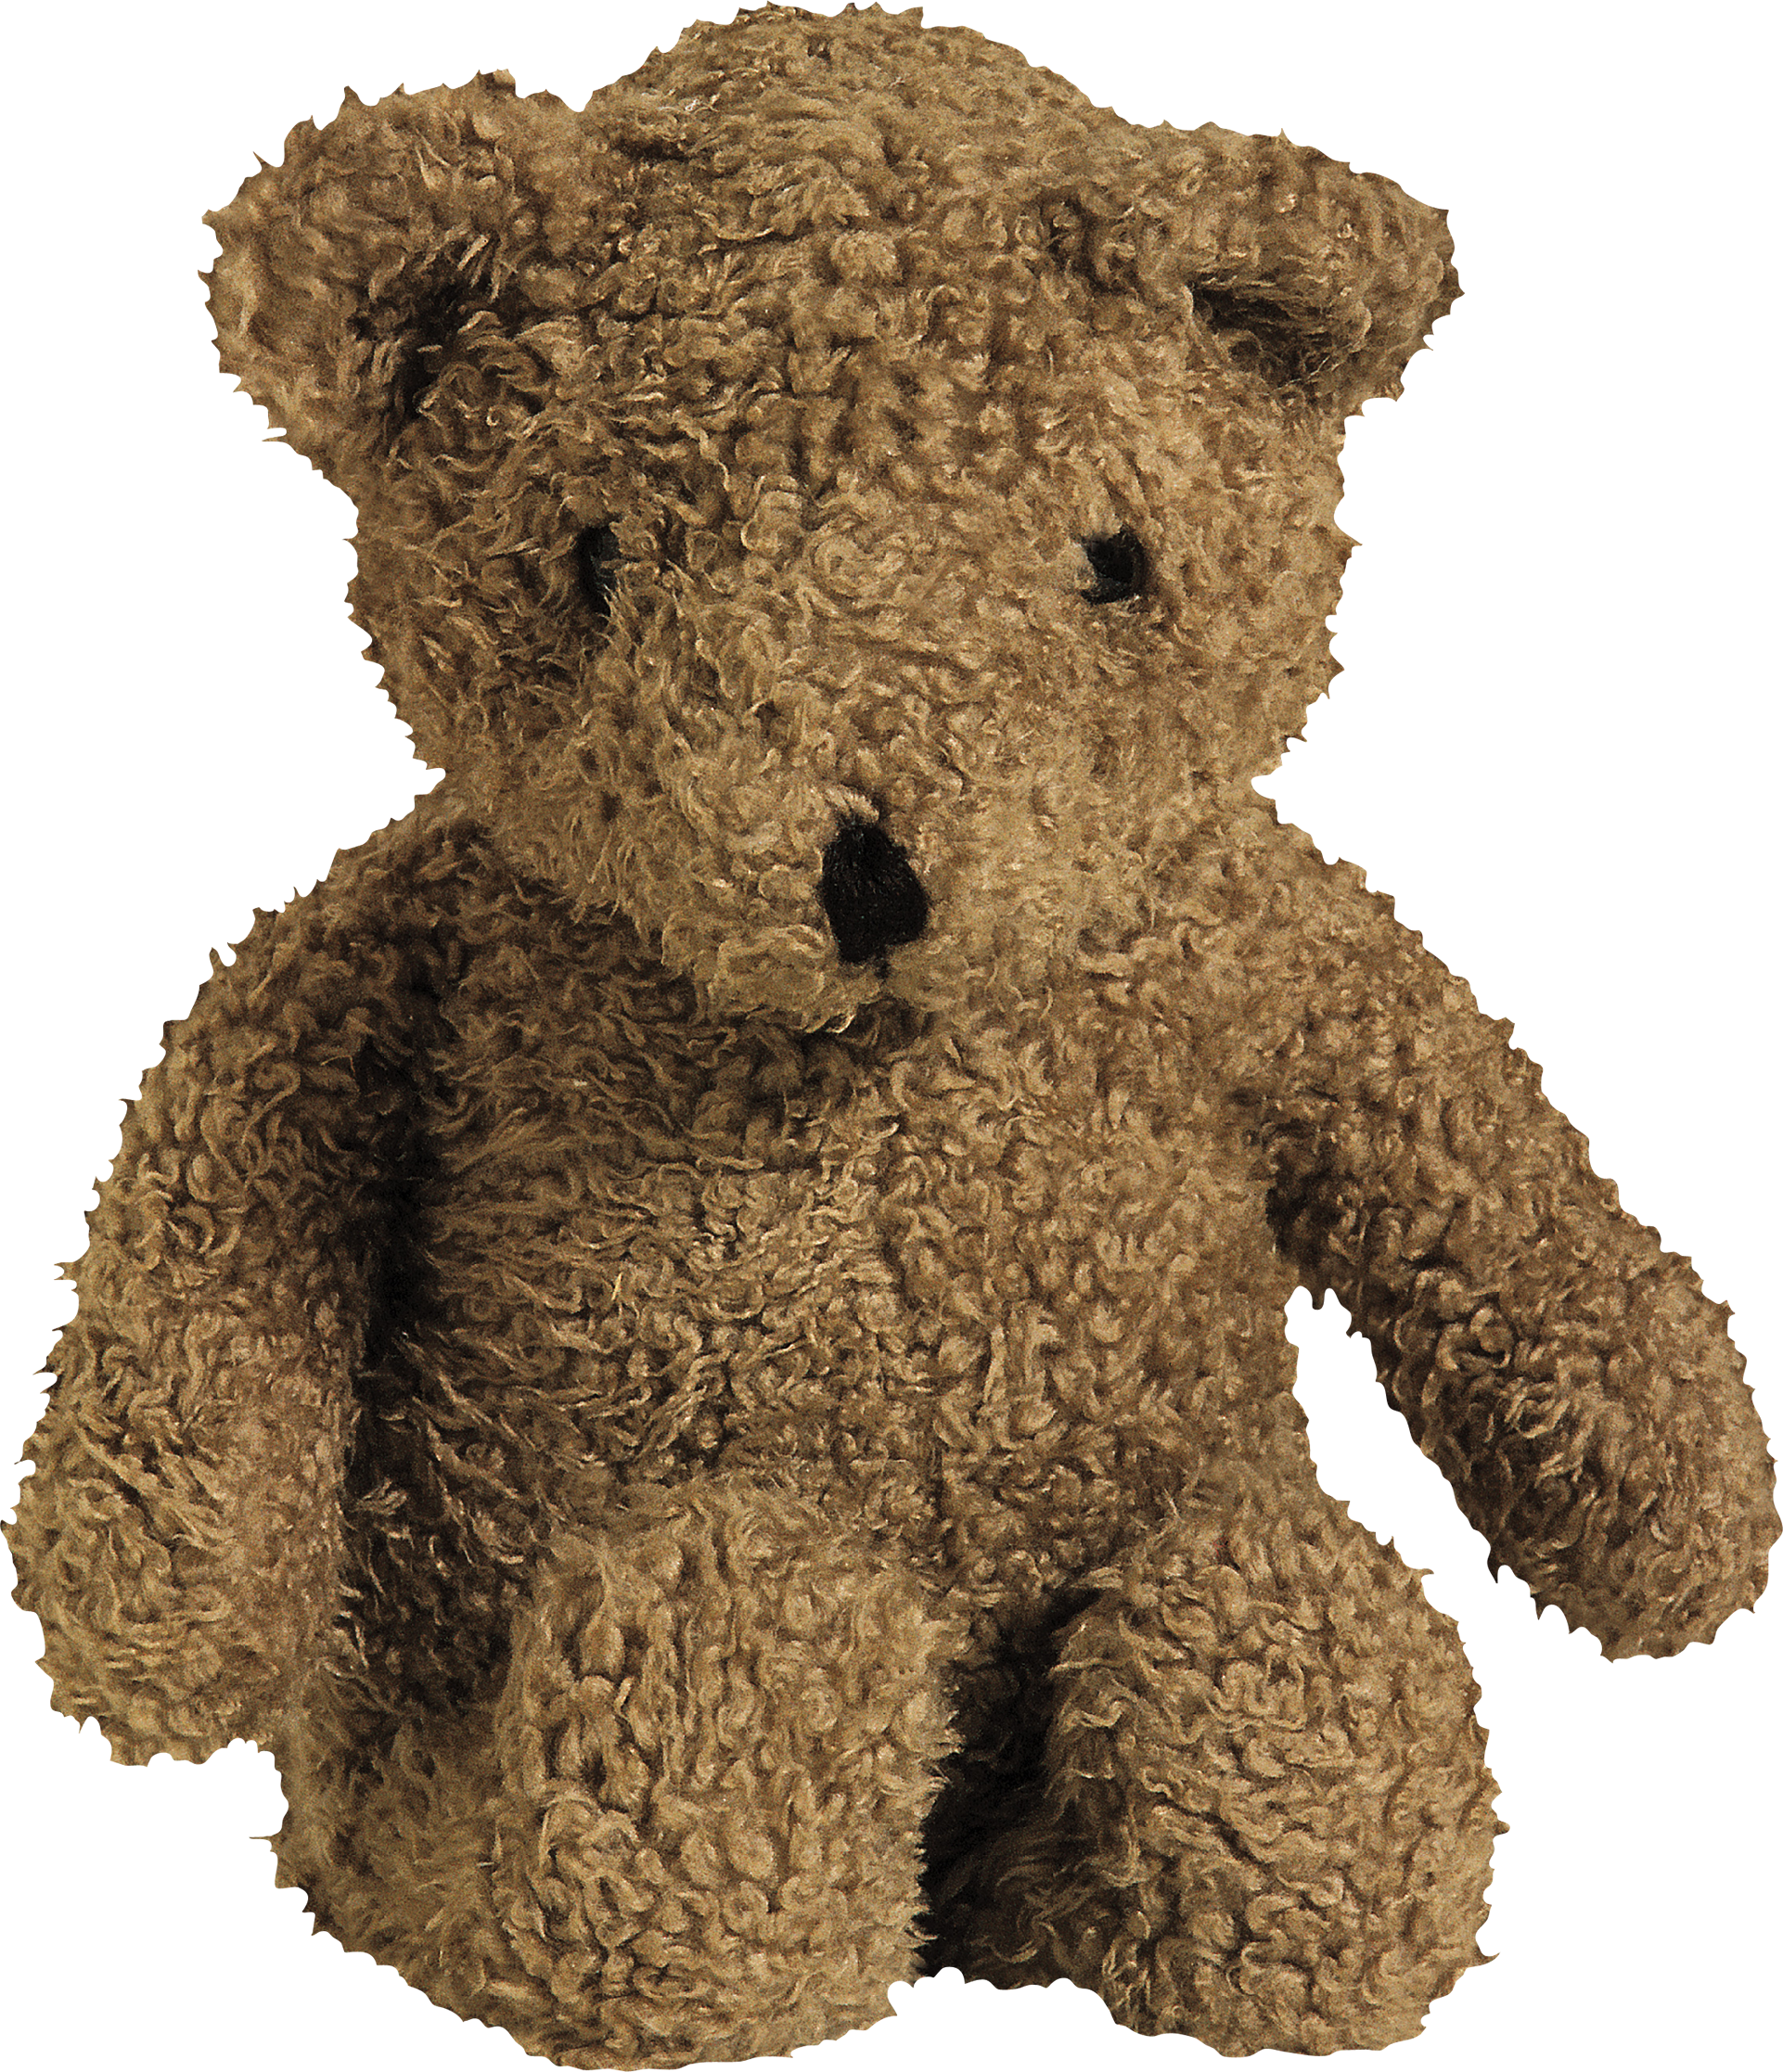 Toy Bear Png Image - Toy, Transparent background PNG HD thumbnail